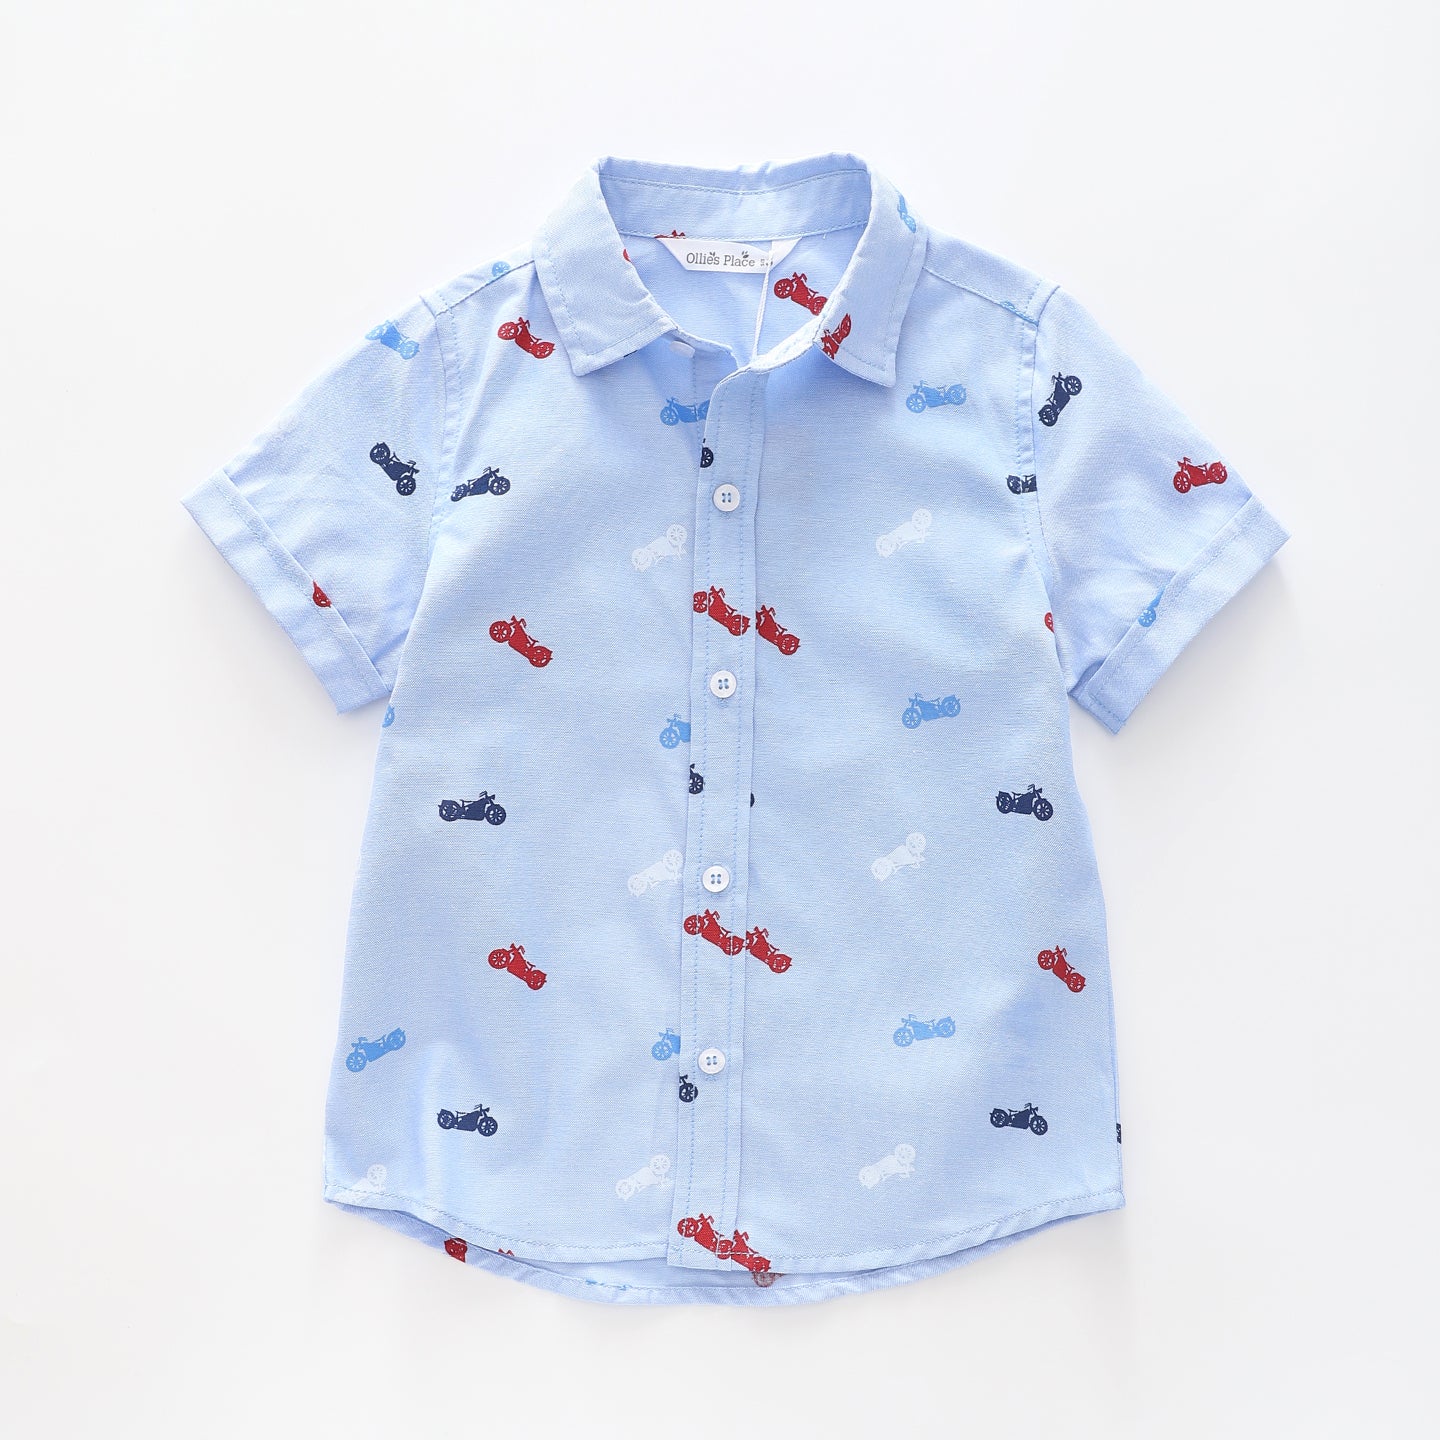 Boy's Blue Shirt With Motorcycle Print